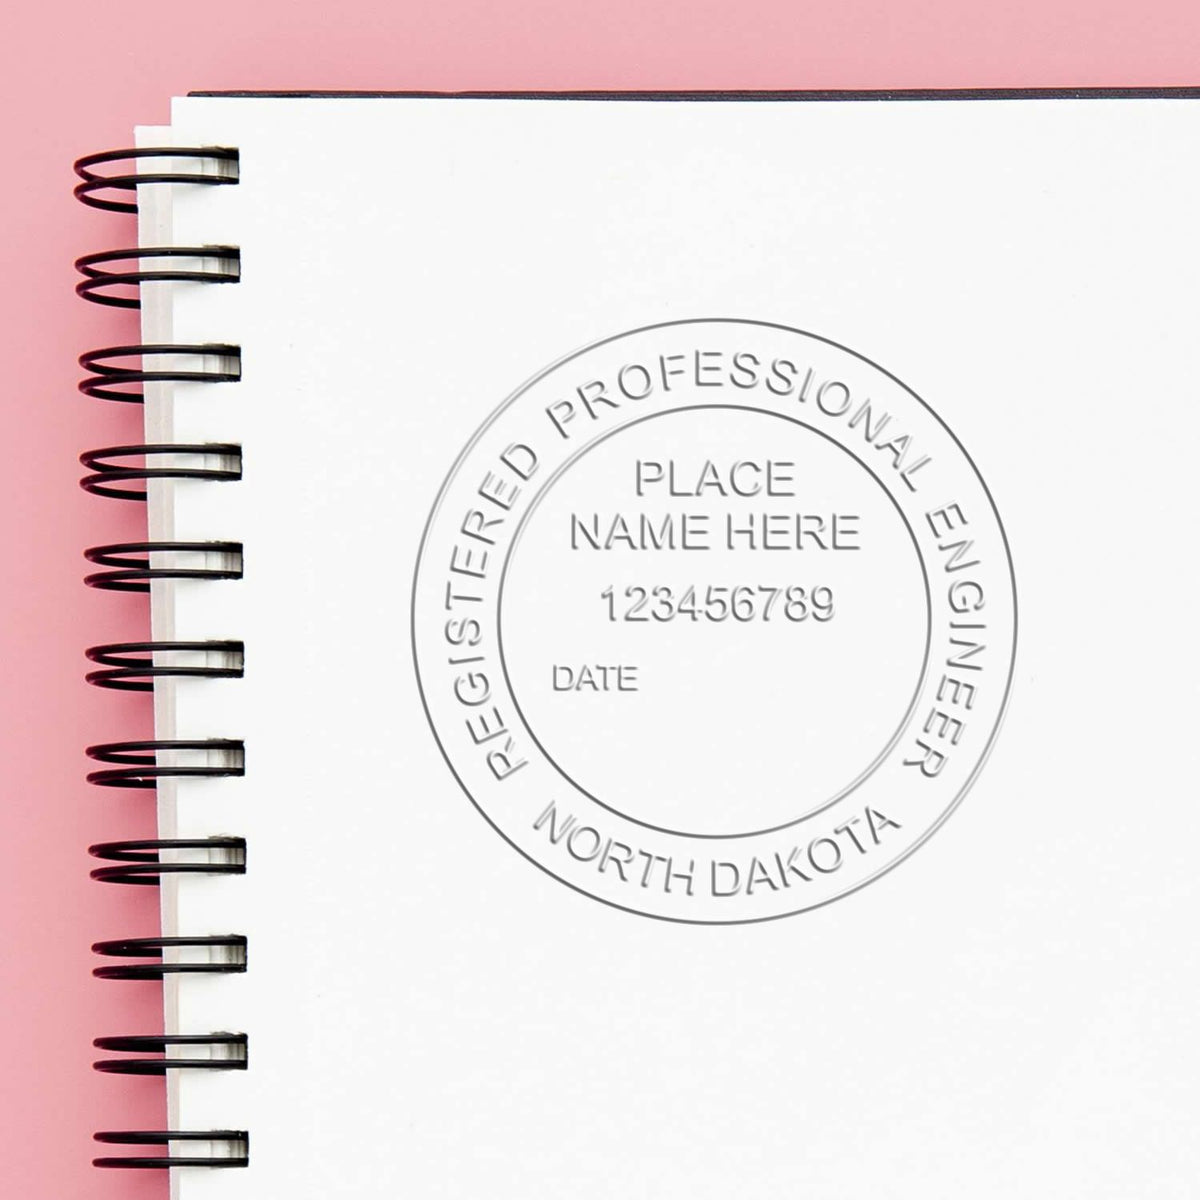 A photograph of the North Dakota Engineer Desk Seal stamp impression reveals a vivid, professional image of the on paper.